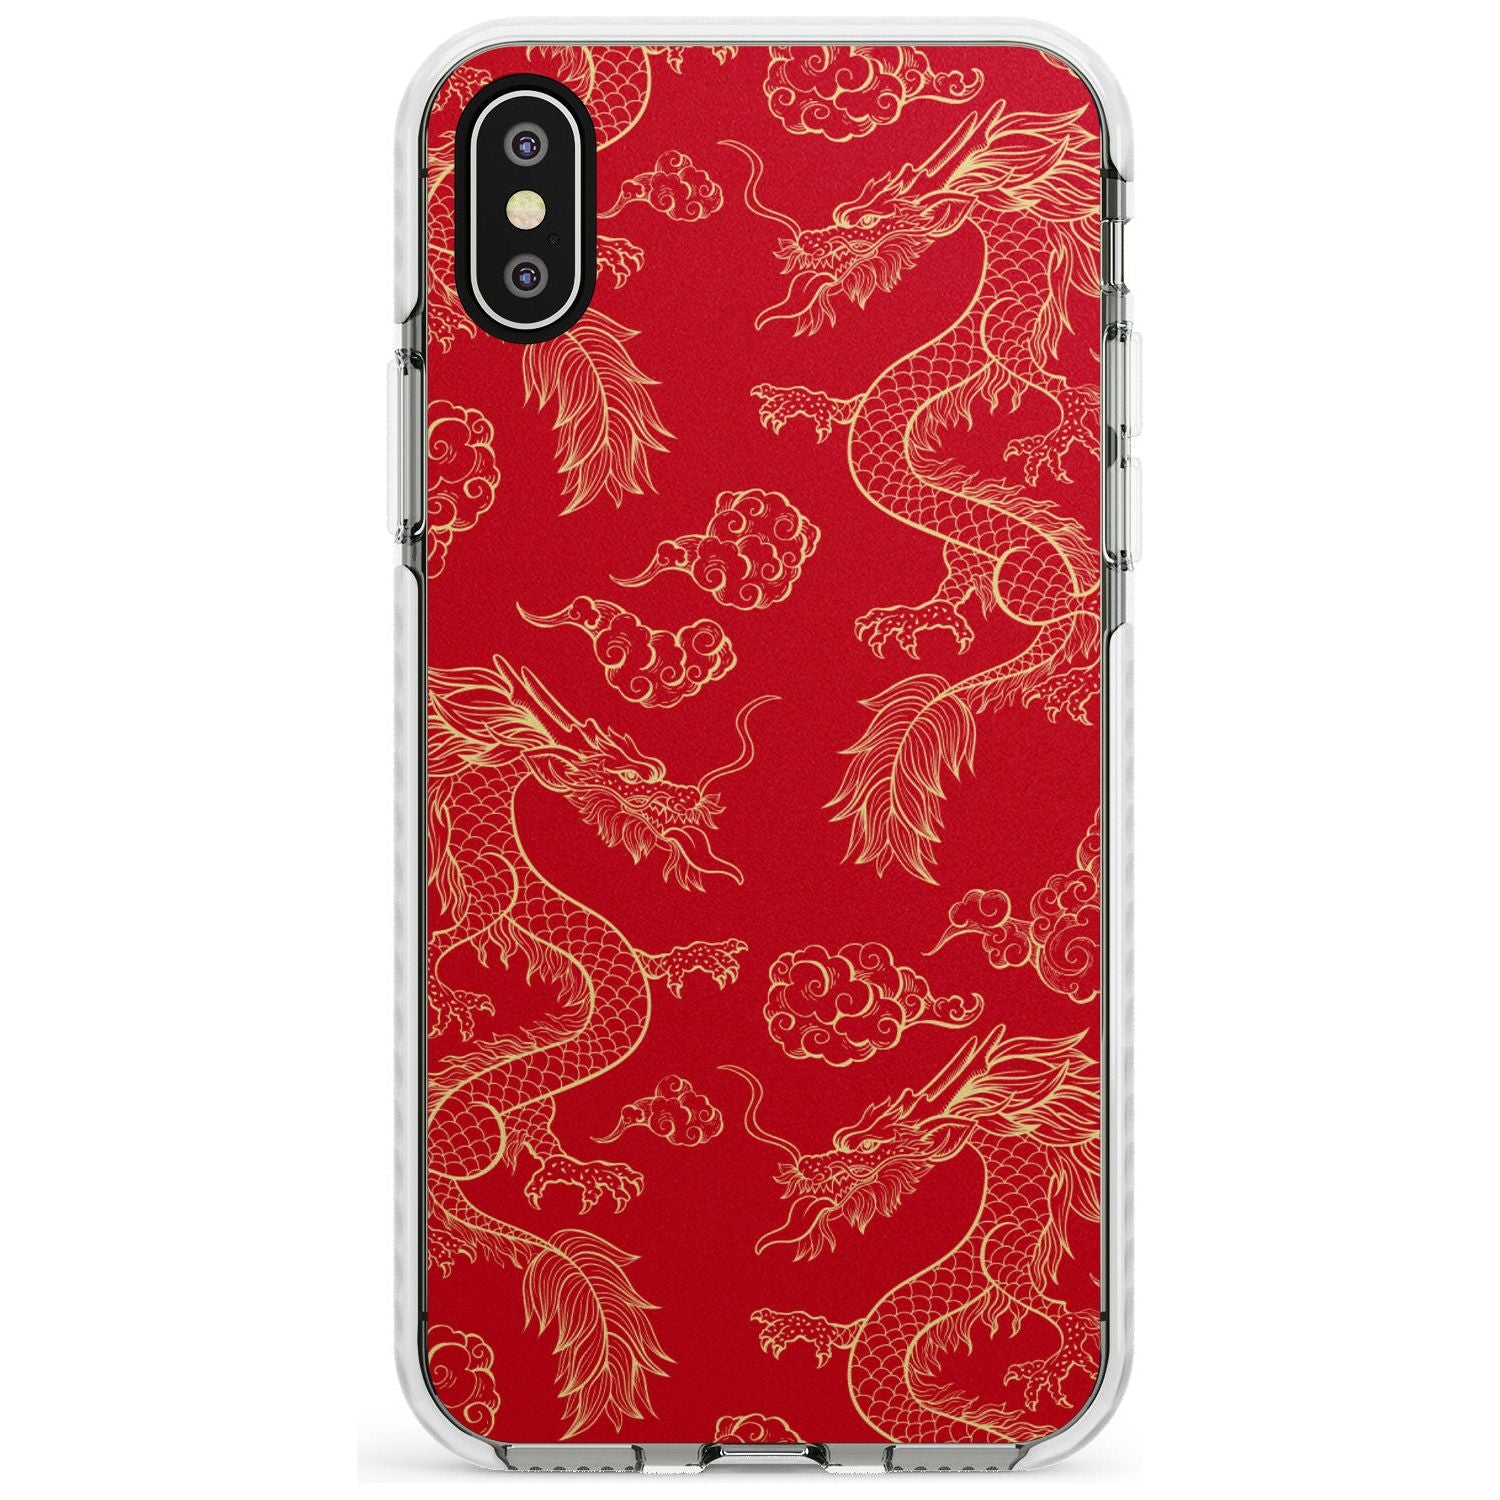 Red and Gold Dragon Pattern Impact Phone Case for iPhone X XS Max XR